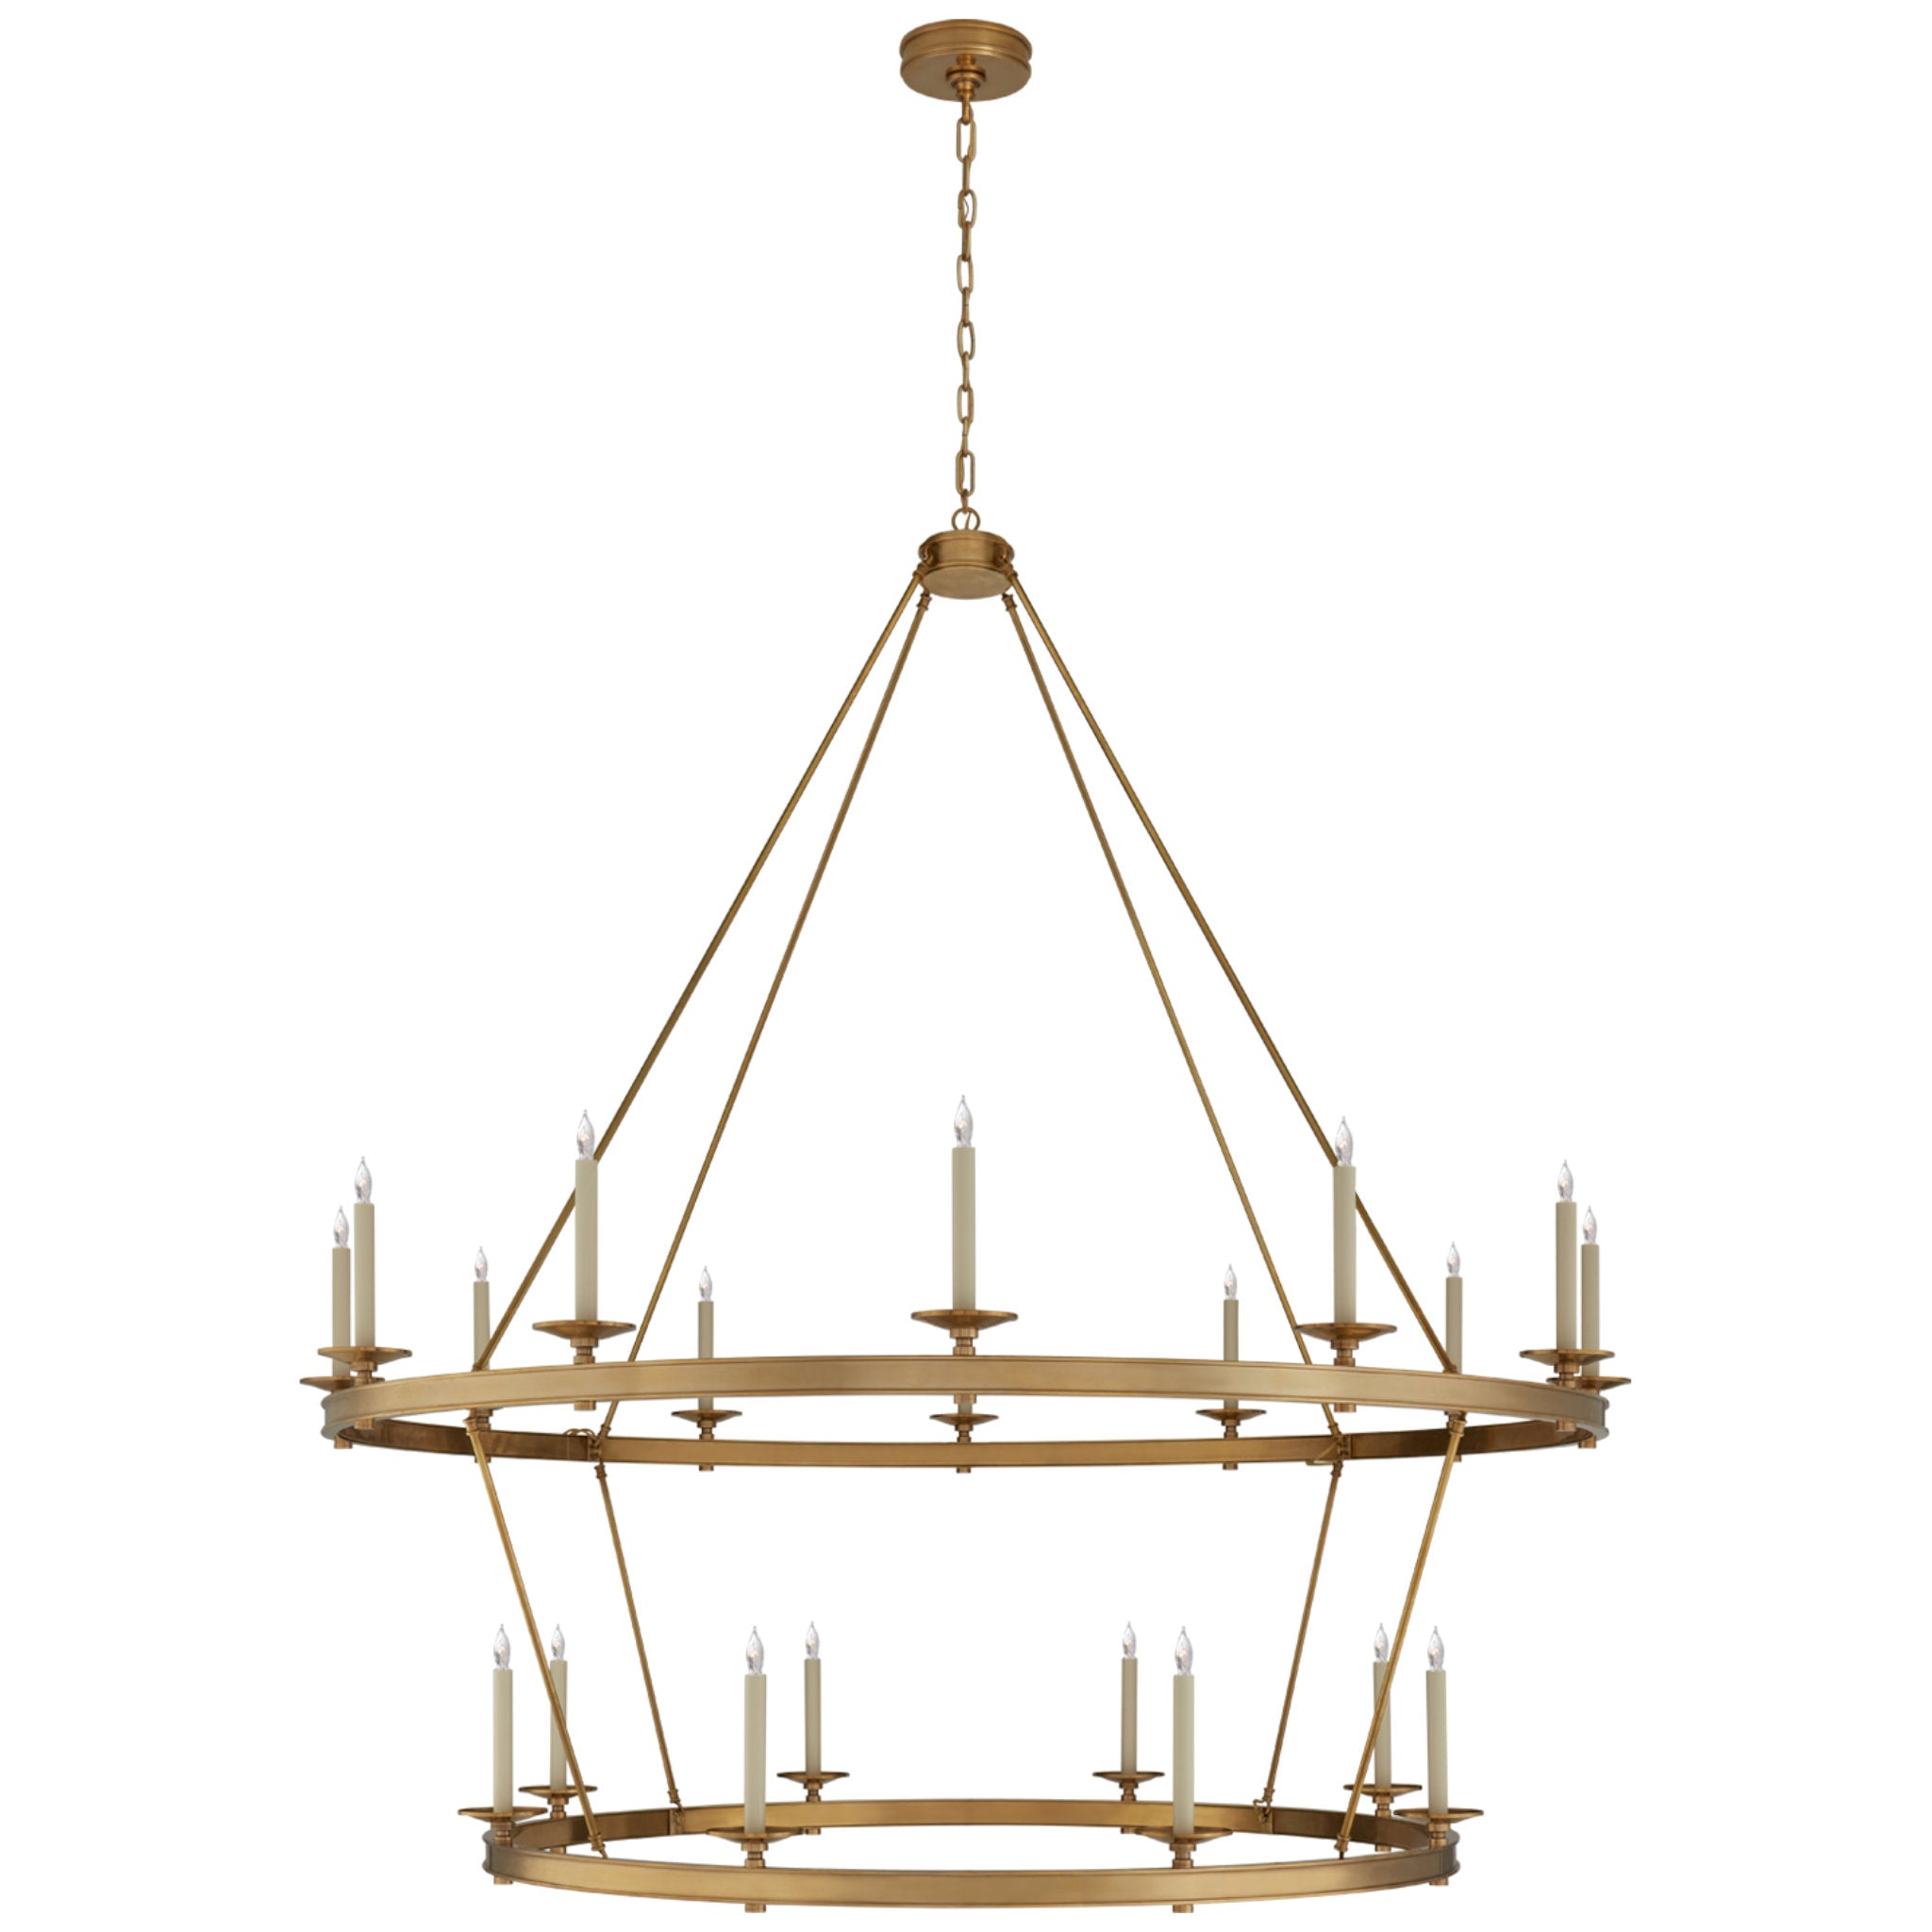 Chapman & Myers Launceton XXL Two Tiered Chandelier in Antique-Burnished Brass